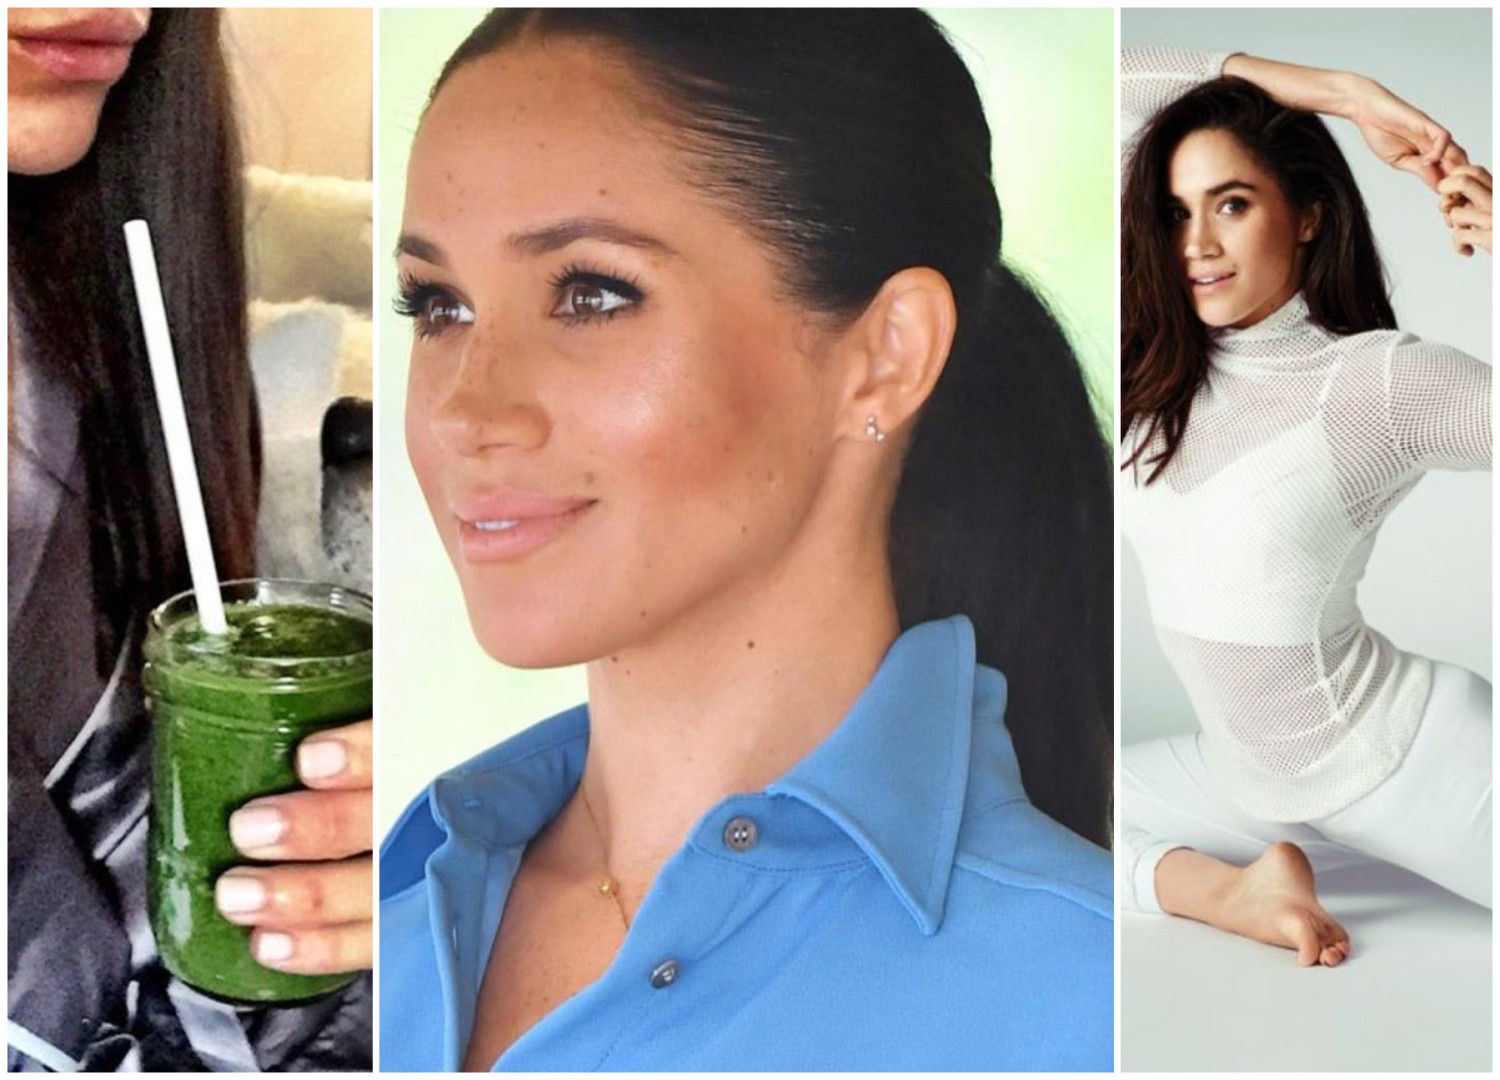 Inside Meghan Markle's US$60,000 health and wellness regime: 10 beauty  secrets the Duchess of Sussex swears by, from LED facials and Megaformer  Pilates classes to Vitamix green juice | South China Morning Post